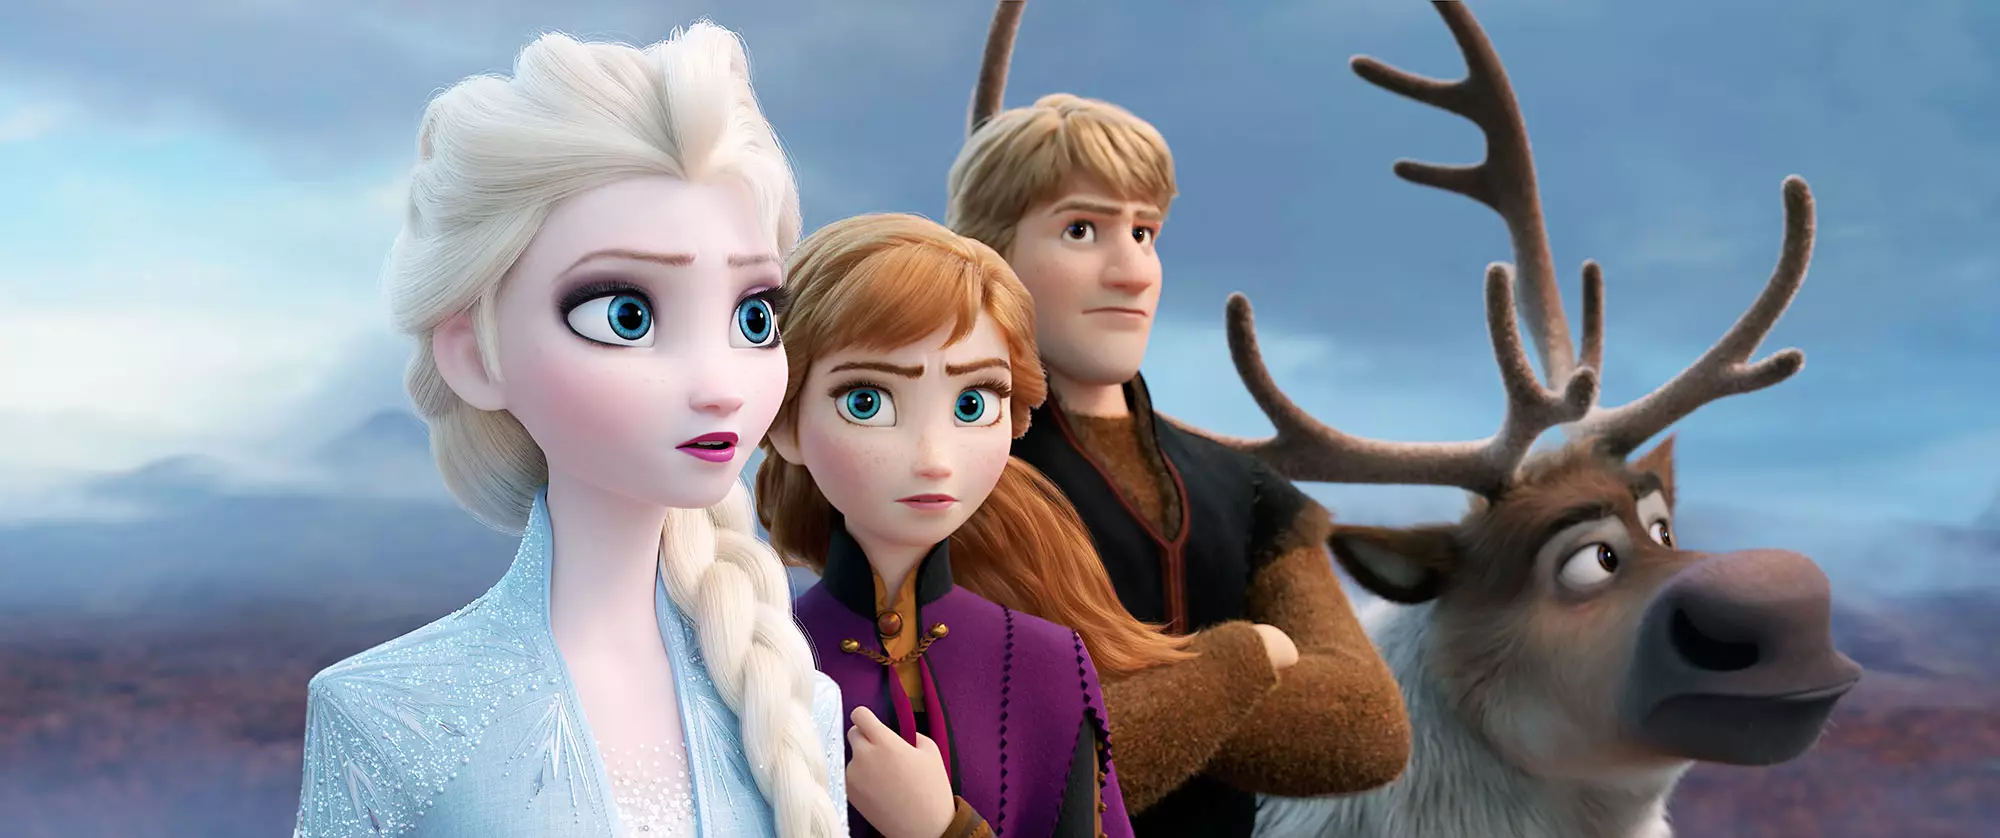 Kristoff is portrayed as supportive and emotional in the film. (